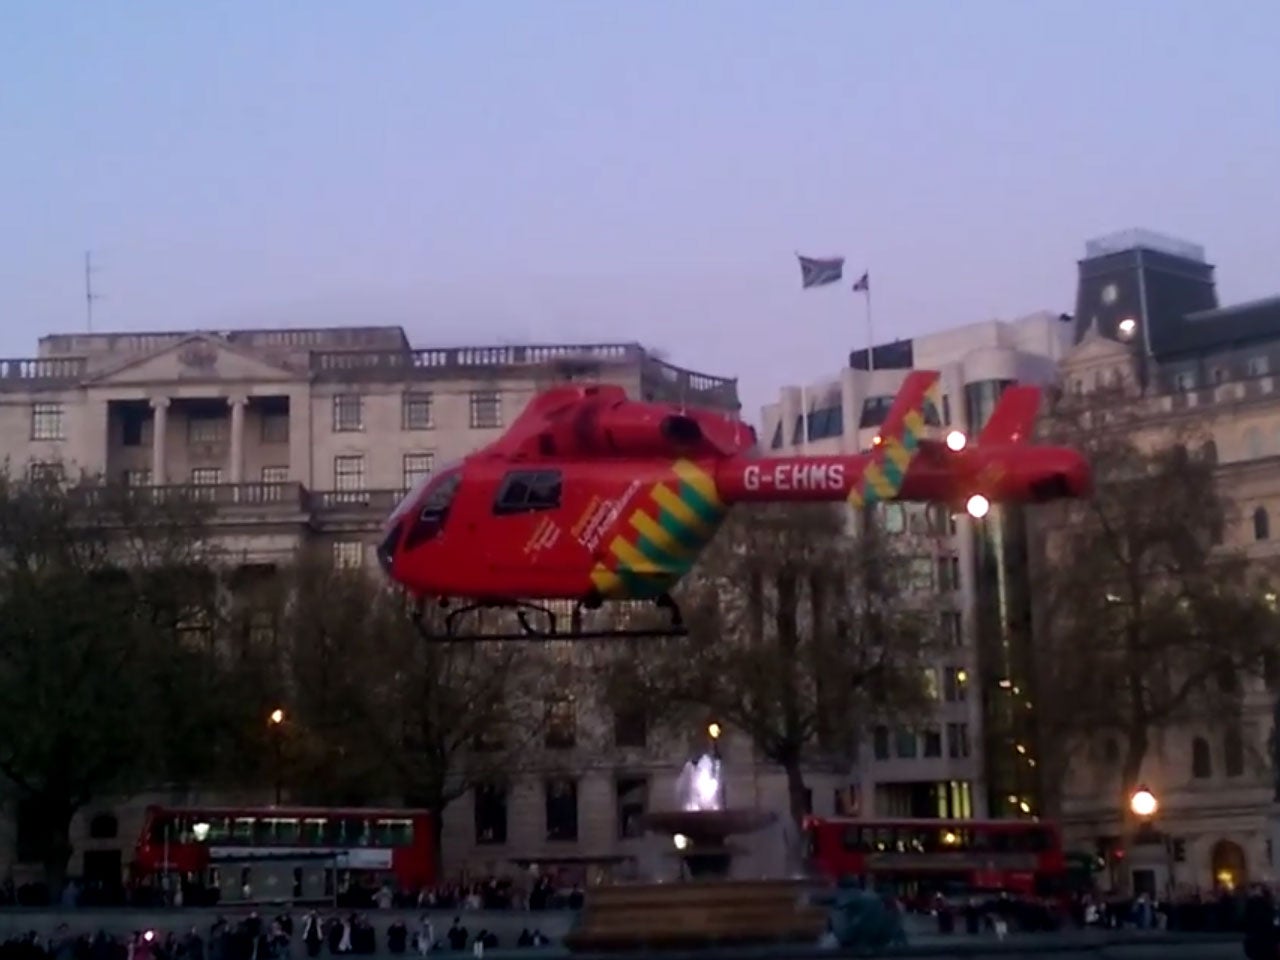 A London air-ambulance takes off from Trafalgar Square after helping treat the woman